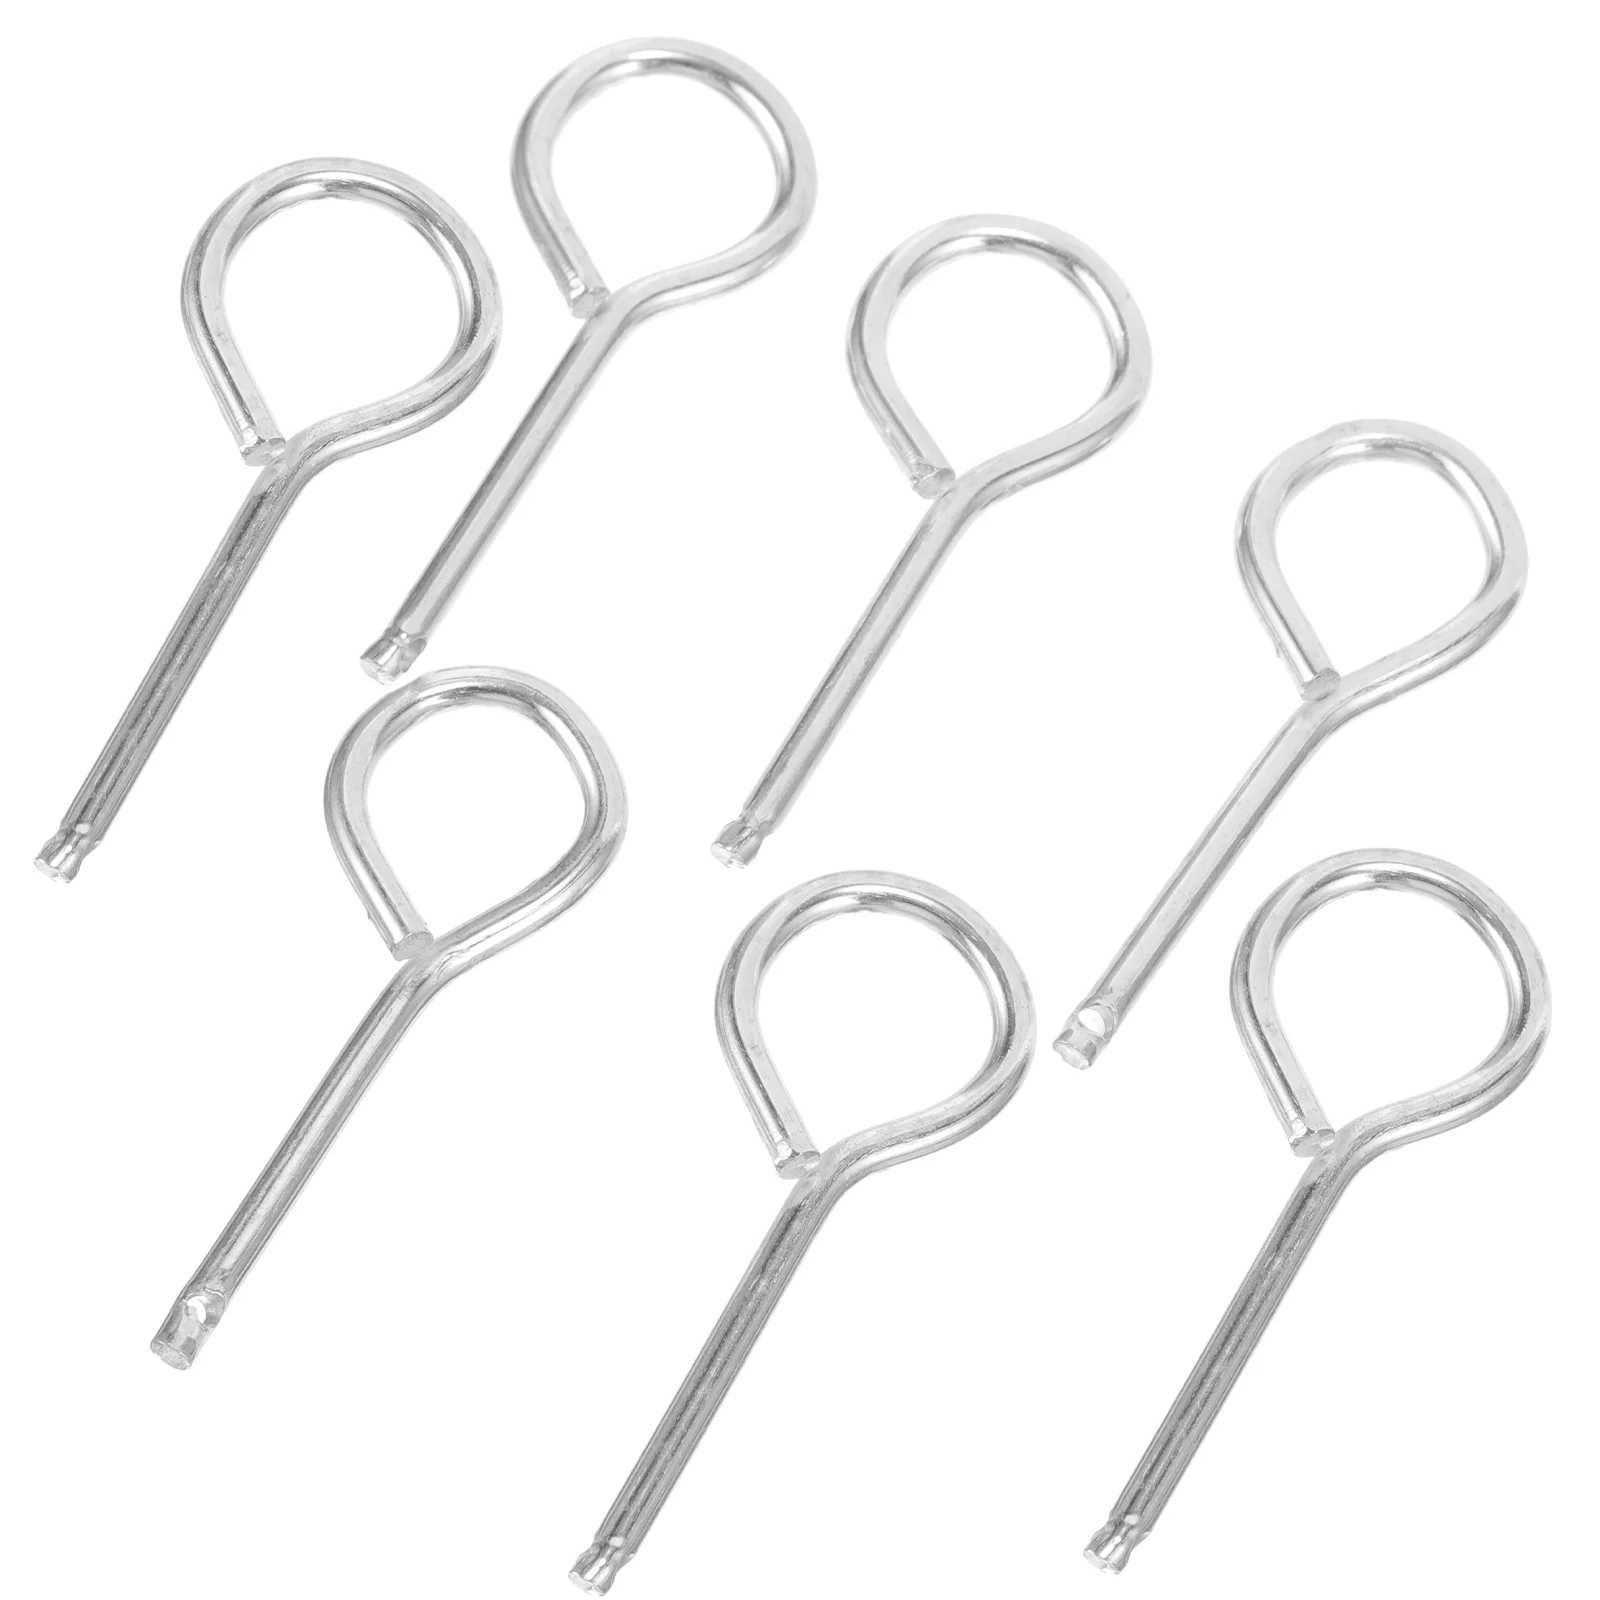 

10 Pcs Pull Extinguisher Latch Accessory Pull Pins for Extinguishers Metal Safety Supply Replacement Lock Iron Equipment